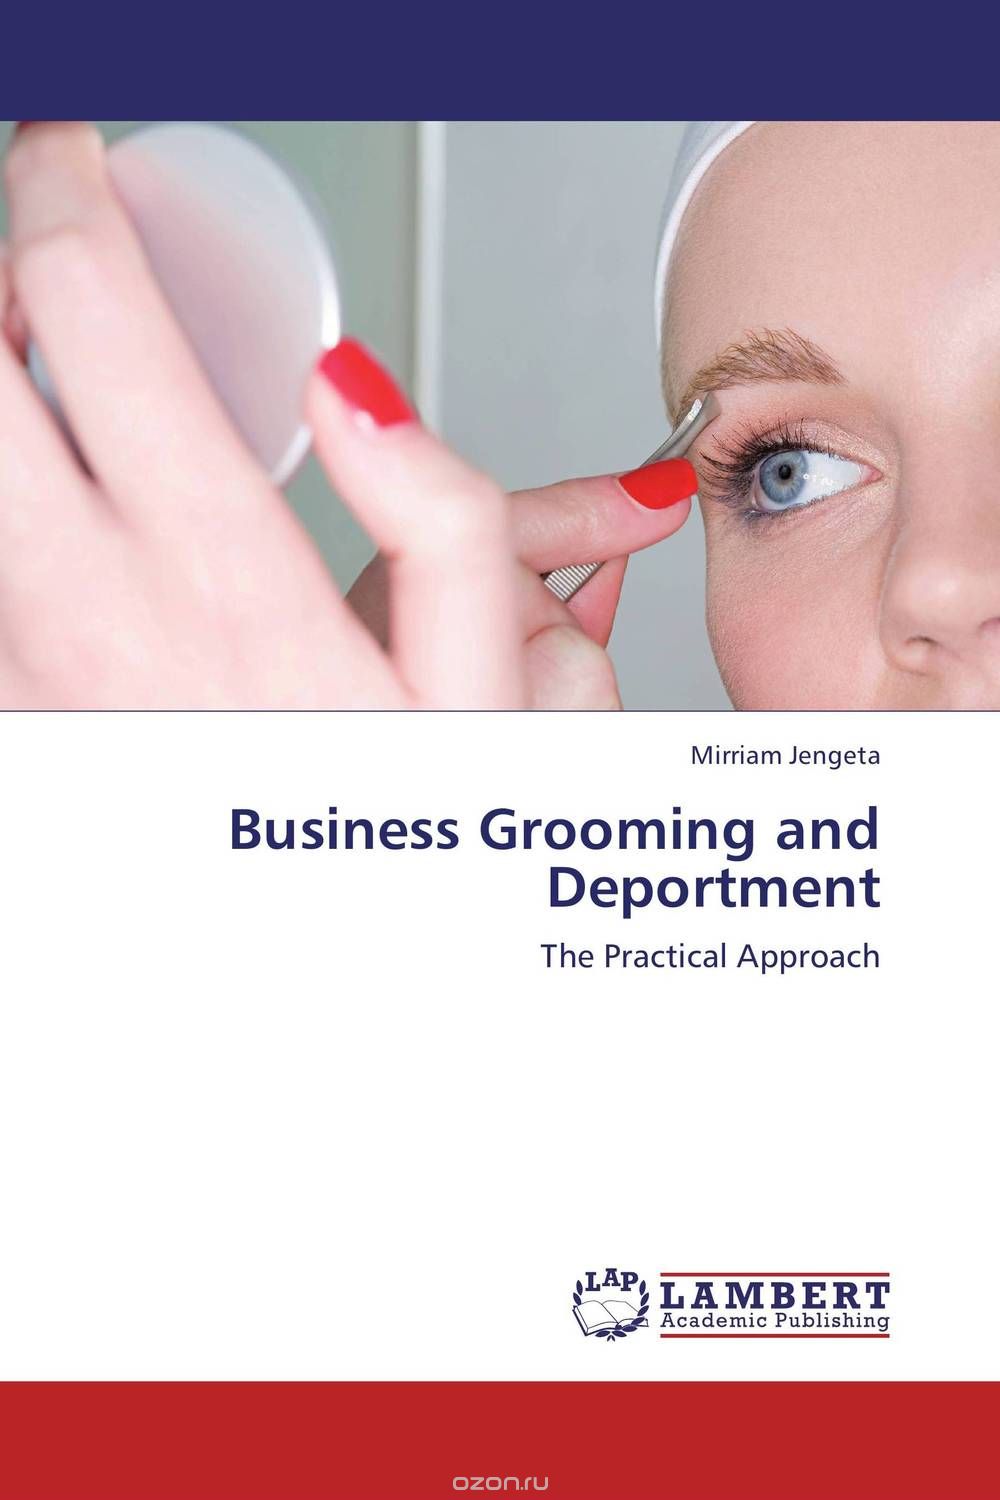 Business Grooming and Deportment